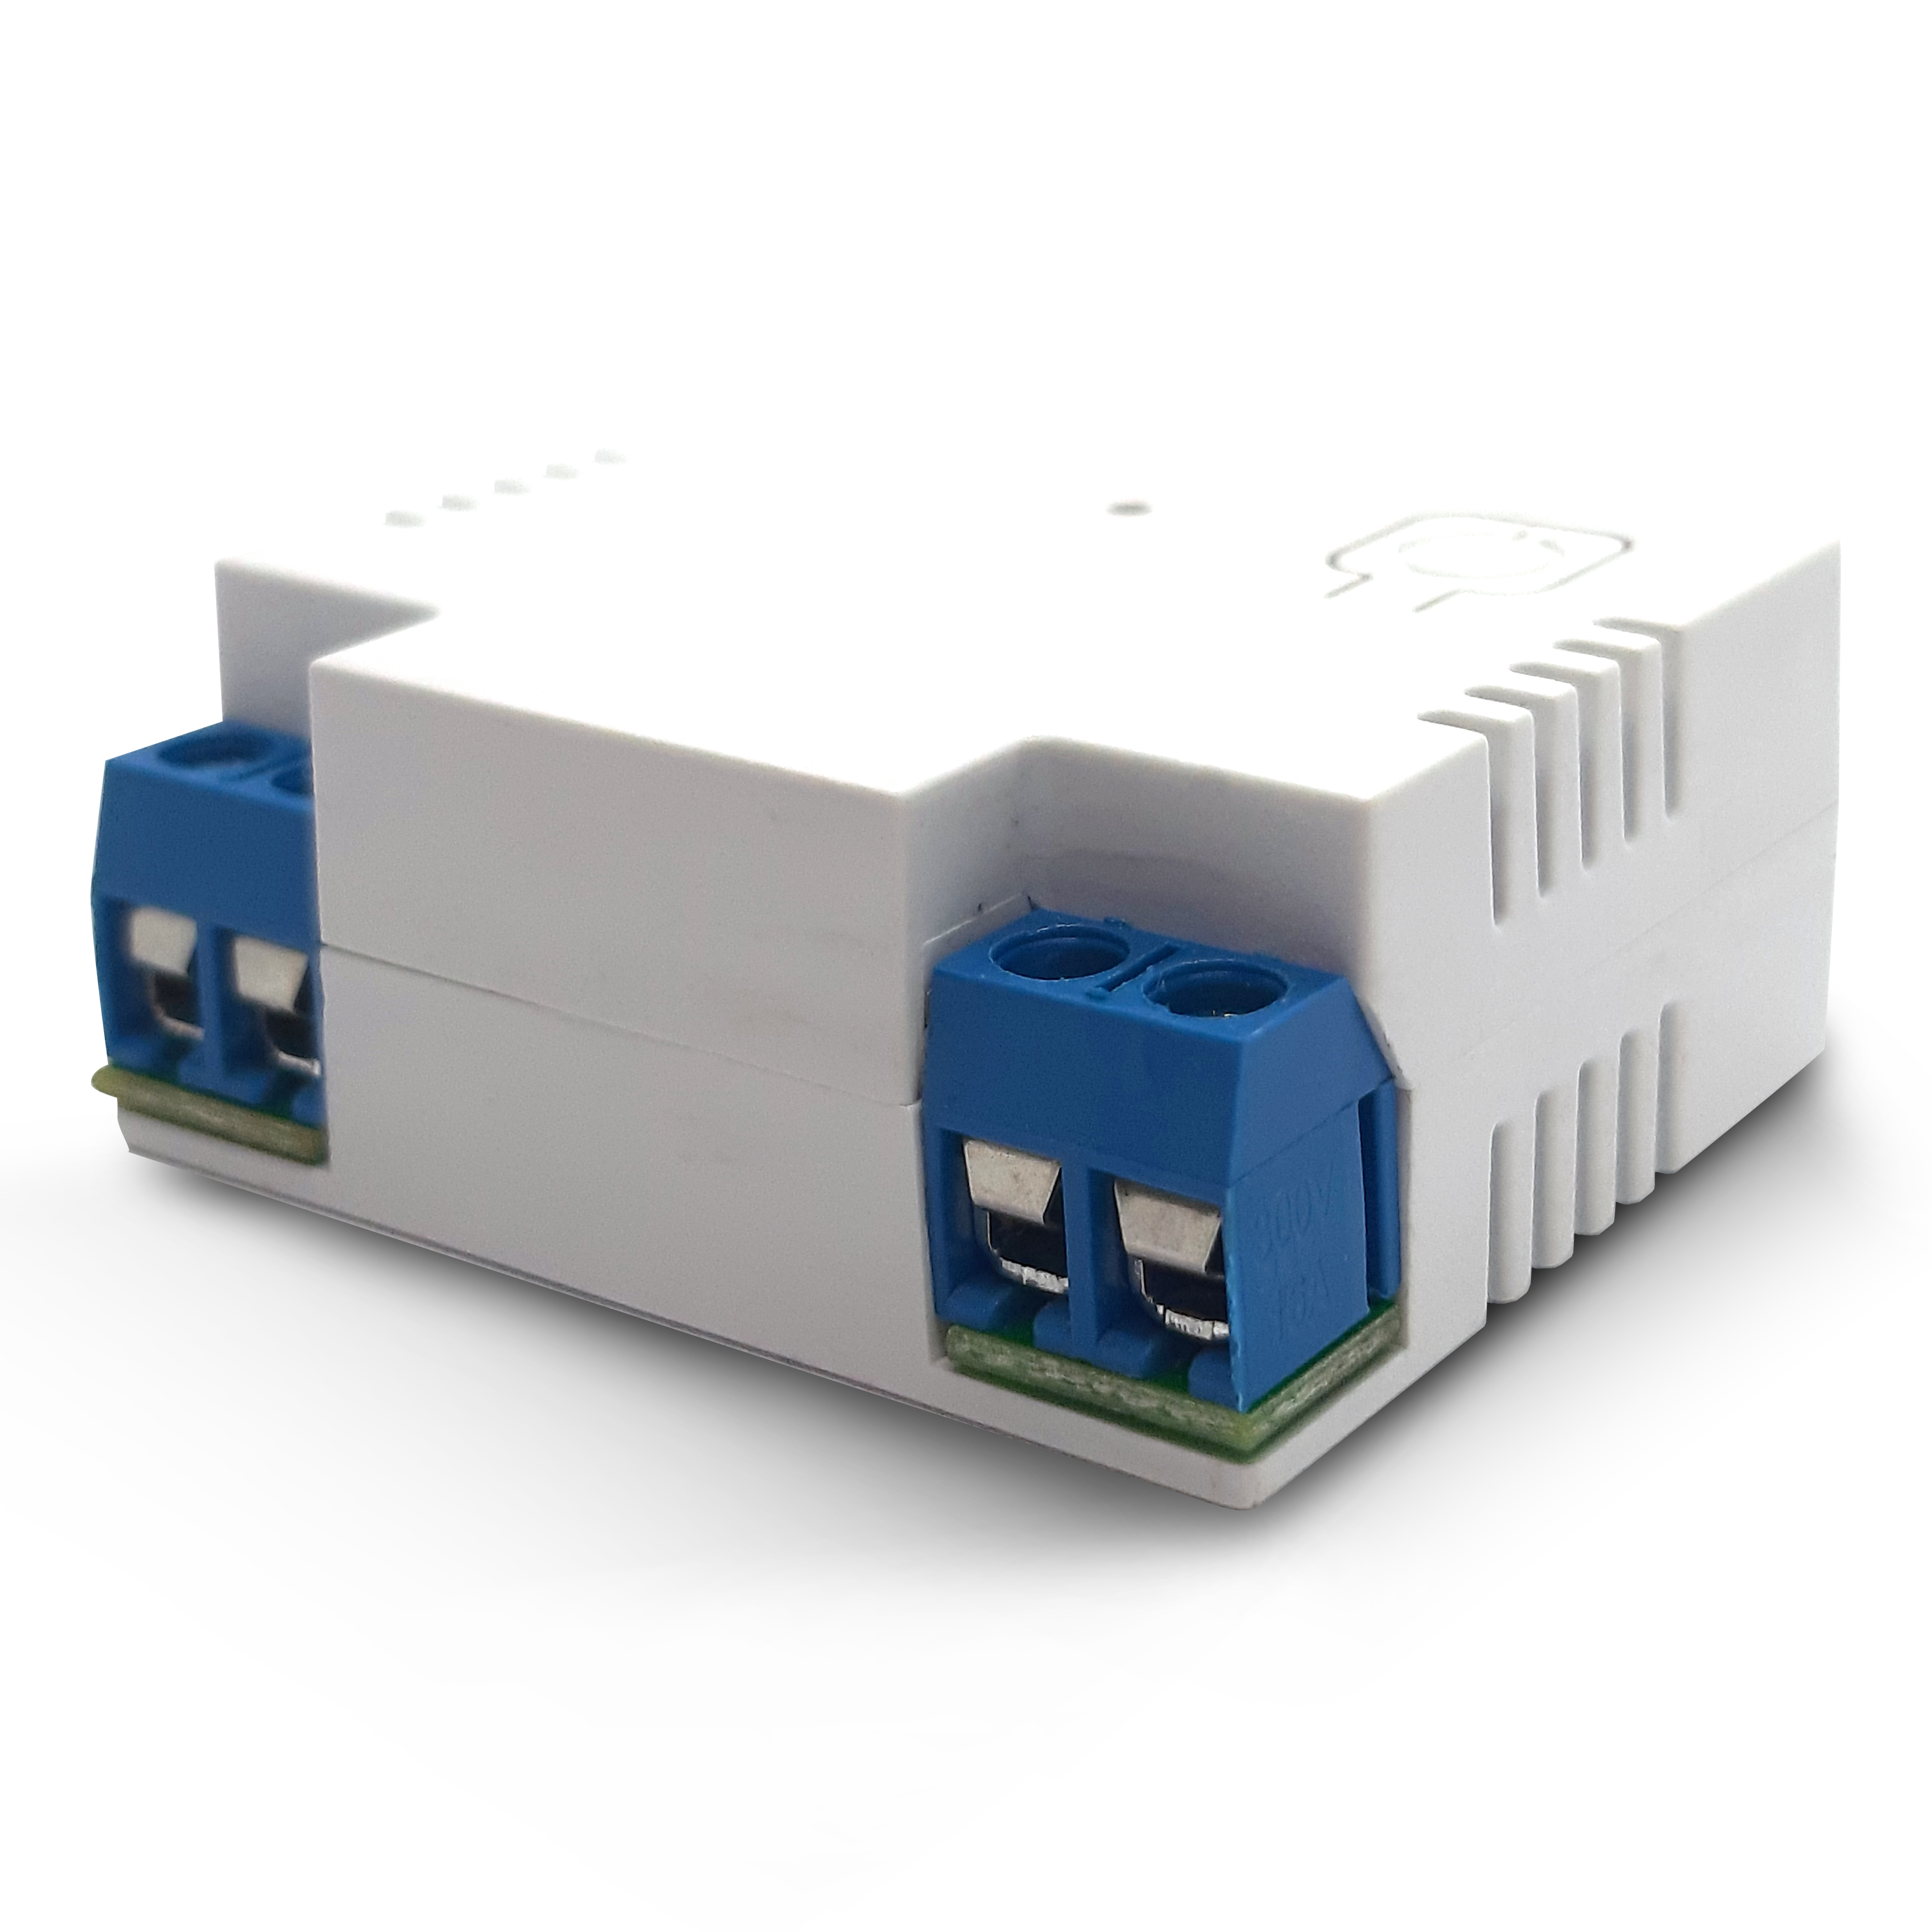 U-Prox Relay AC -  Wireless controlled AC relay with the ability to measure the consumption of the connected device